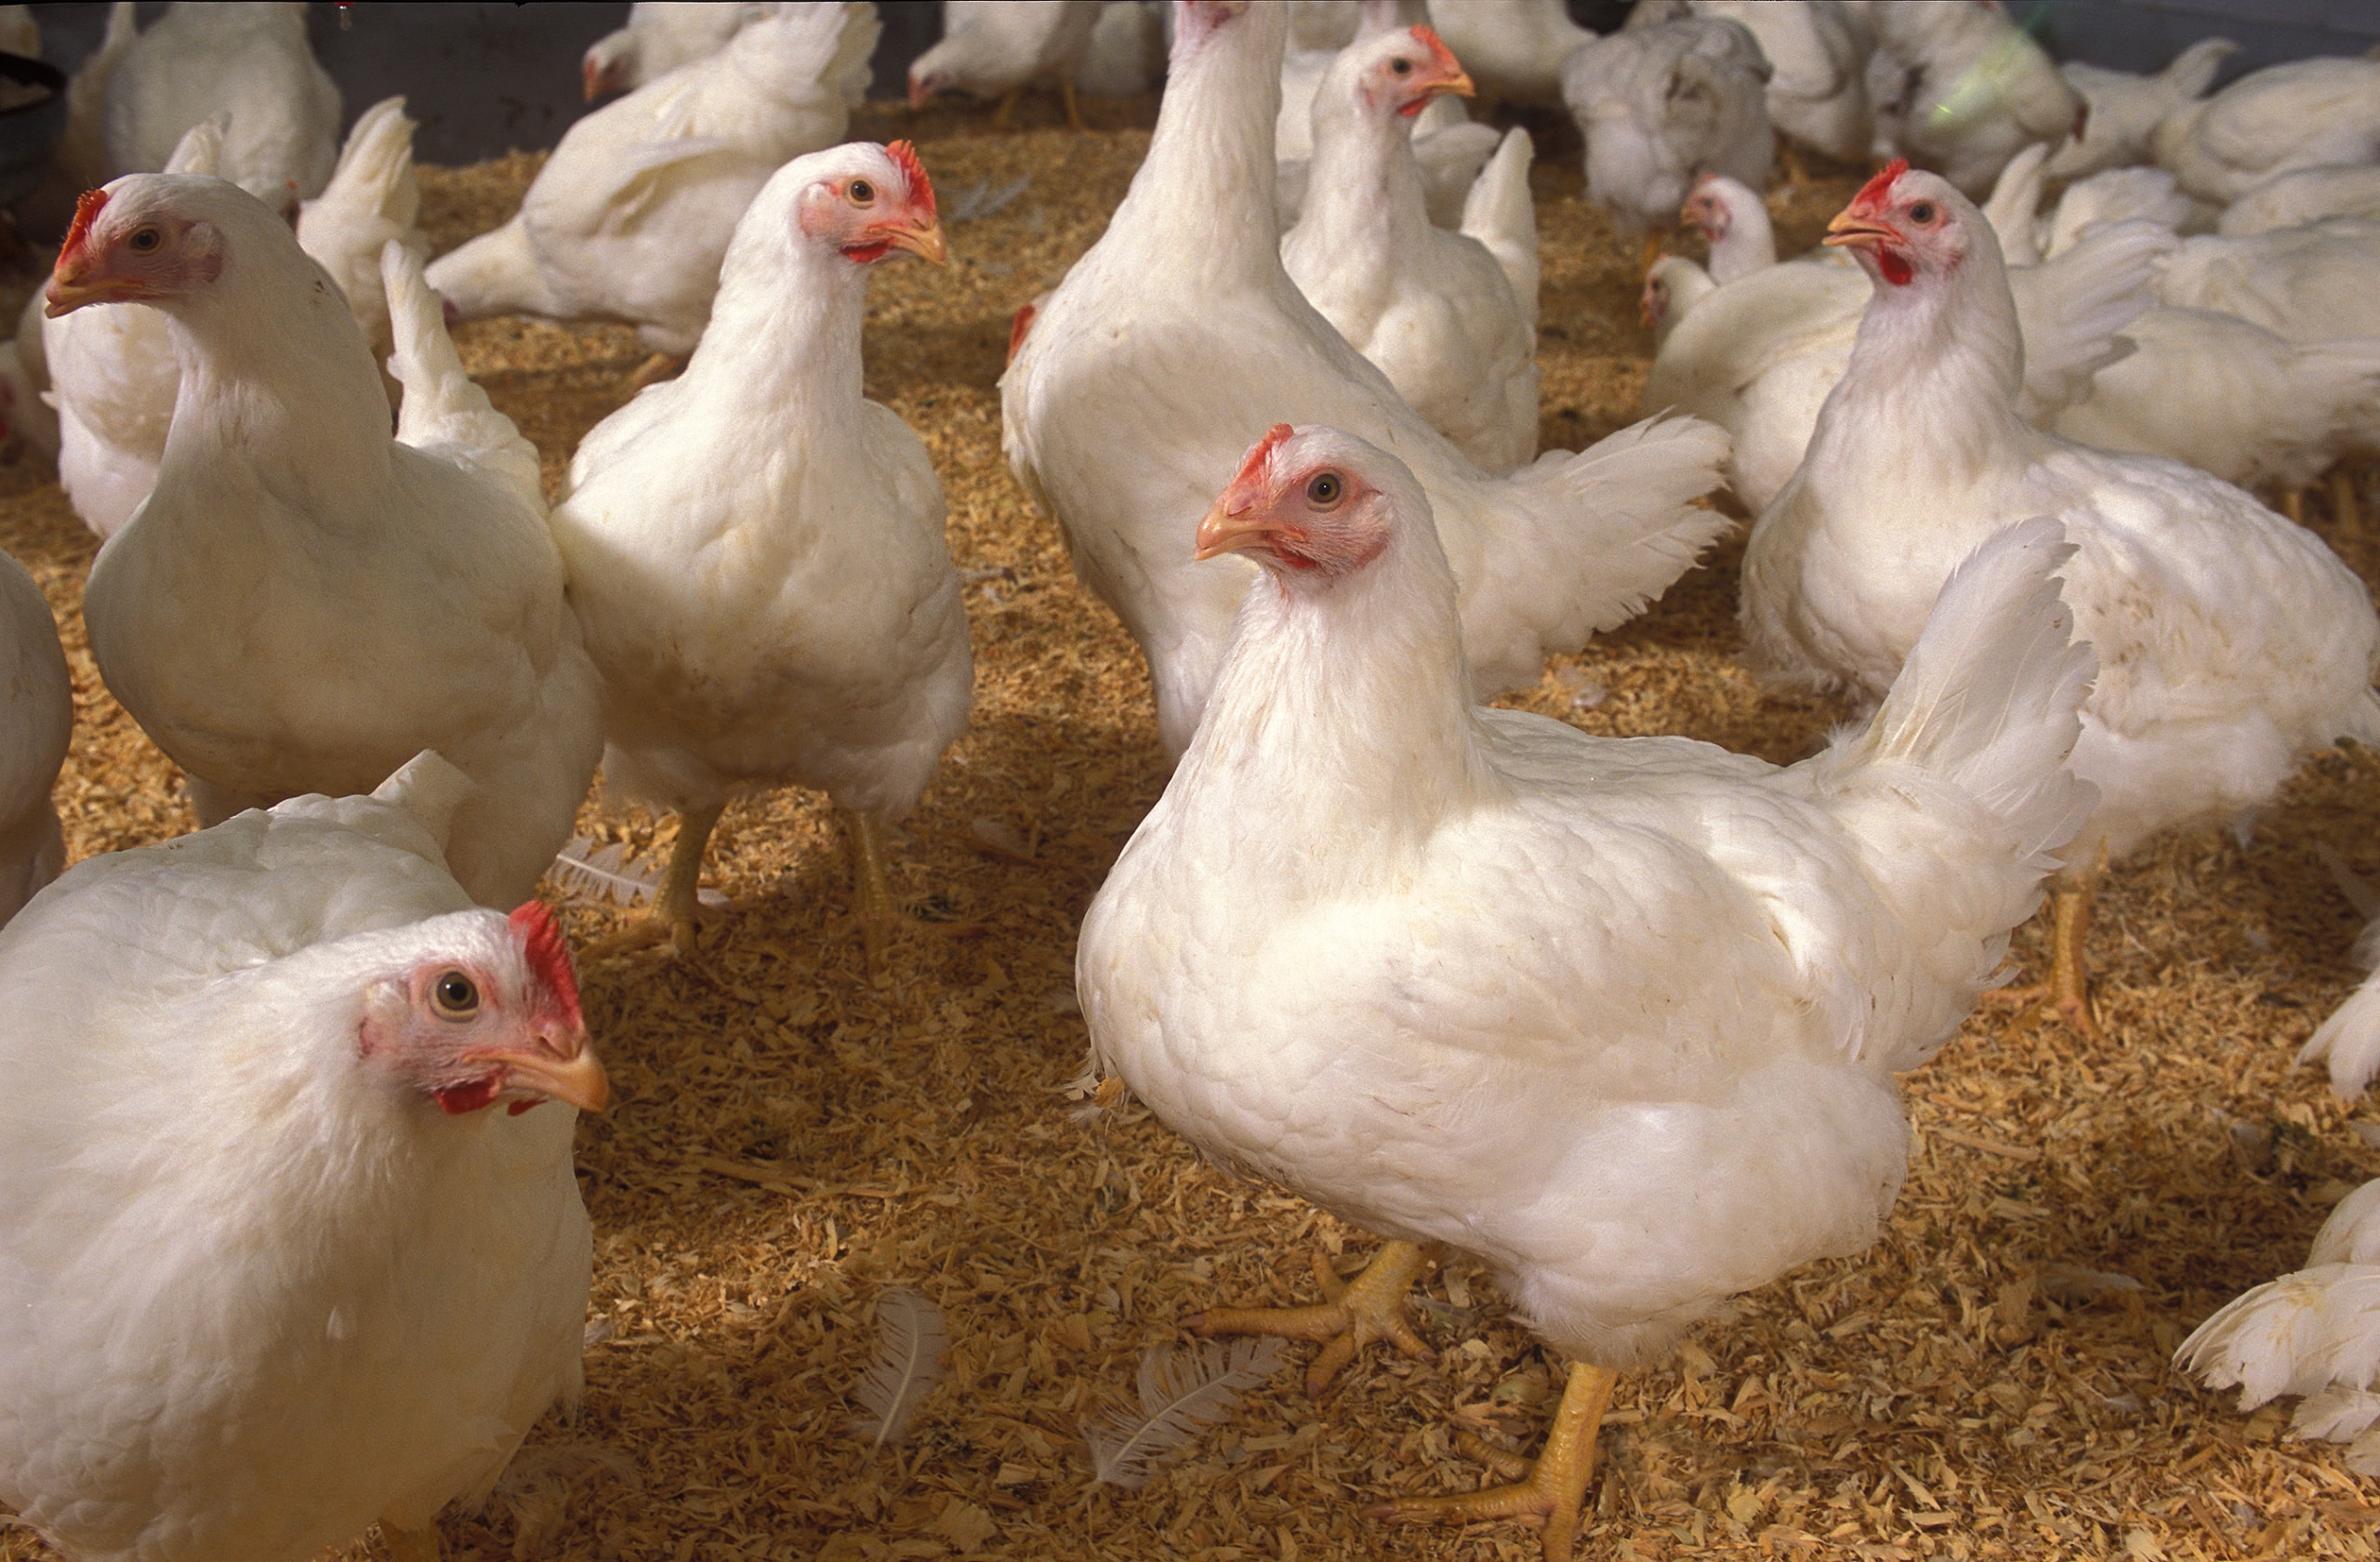 Scientists with ARS and the University of Maryland-Eastern Shore have developed methods to make Salmonella easier to identify among living populations of mixed bacteria on poultry